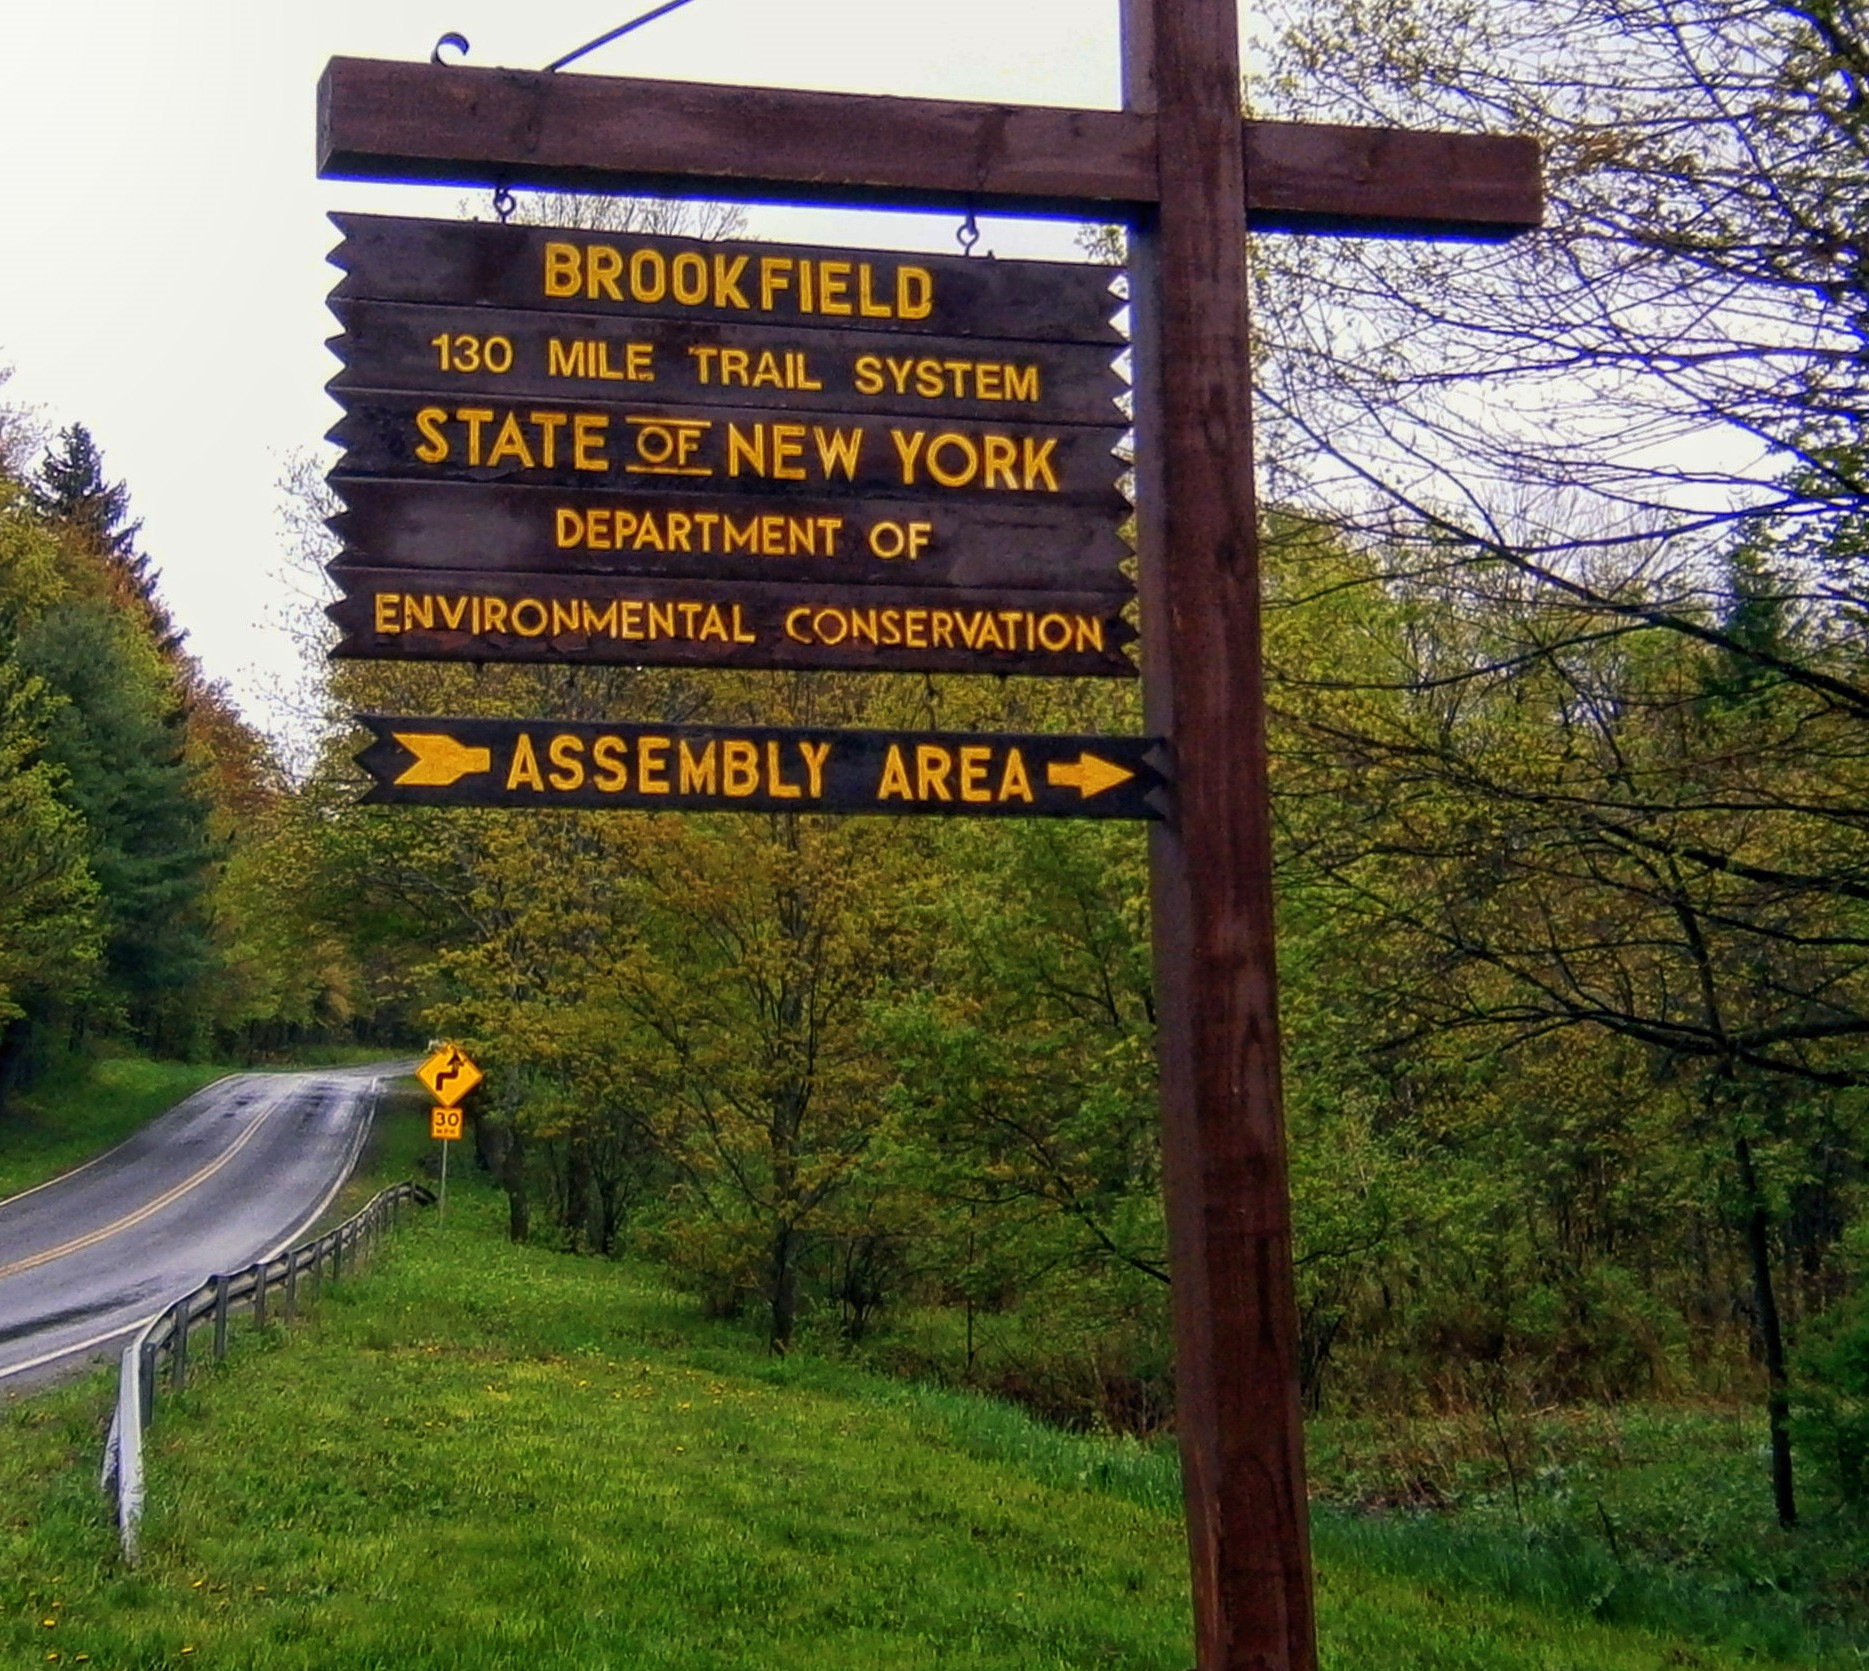 Brookfield Trail System in New York | Top Horse Trails